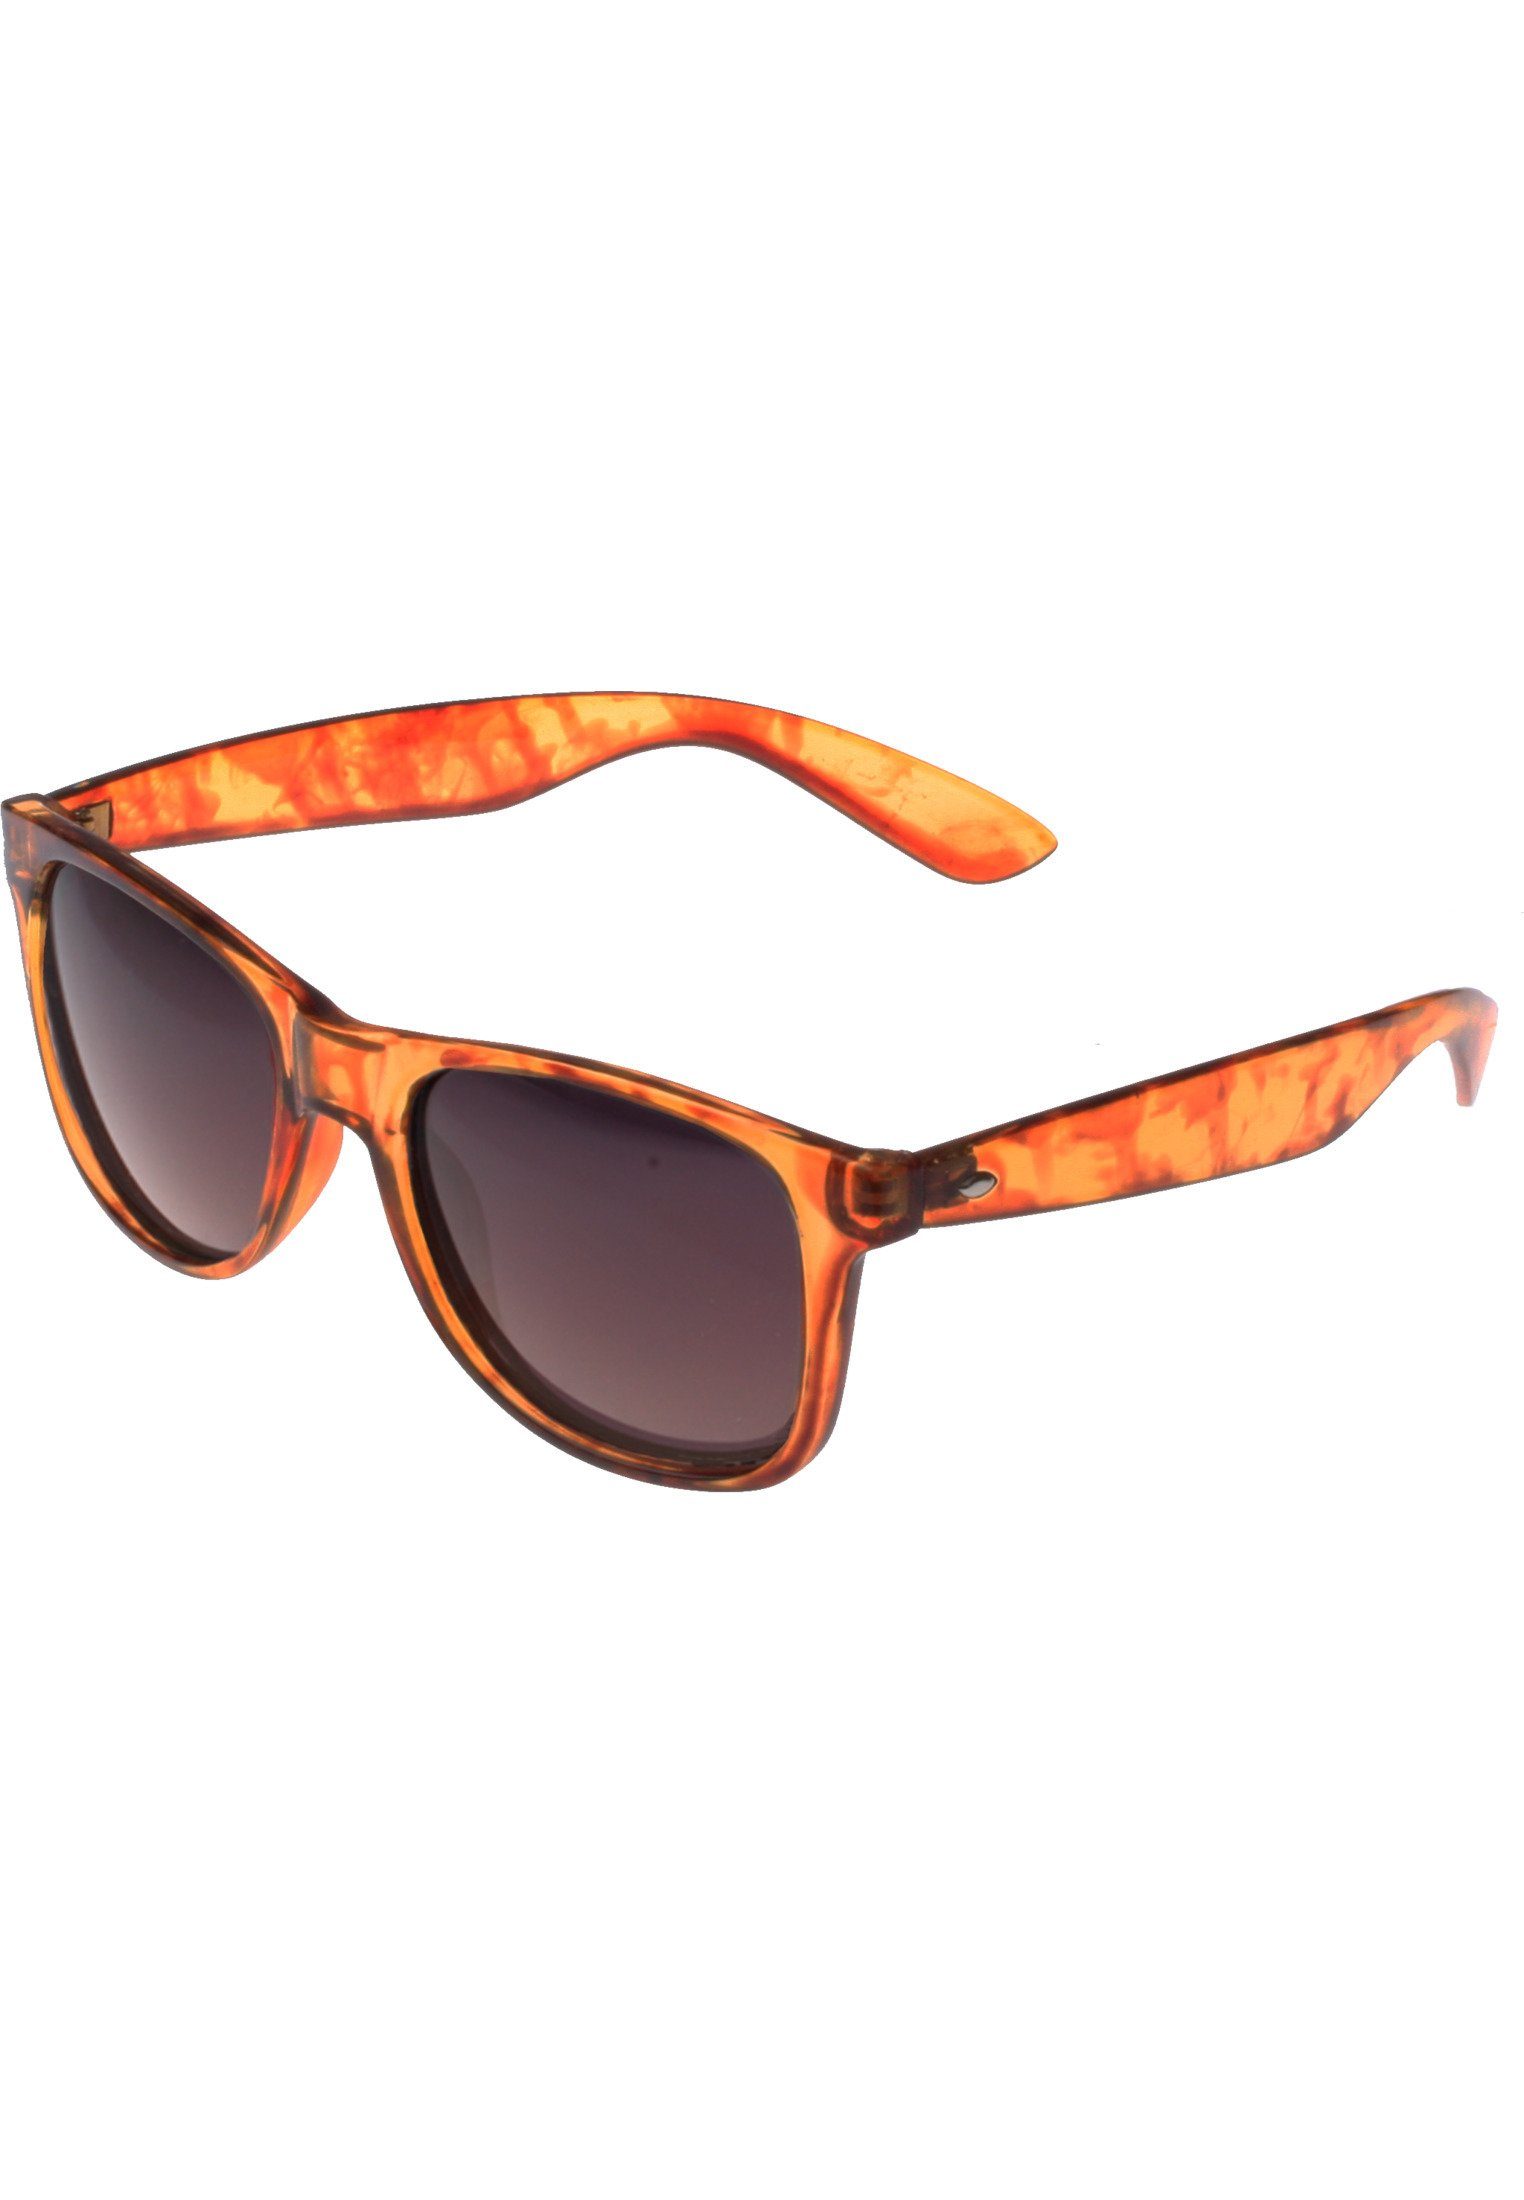 amber Accessoires Sonnenbrille GStwo Shades Groove MSTRDS